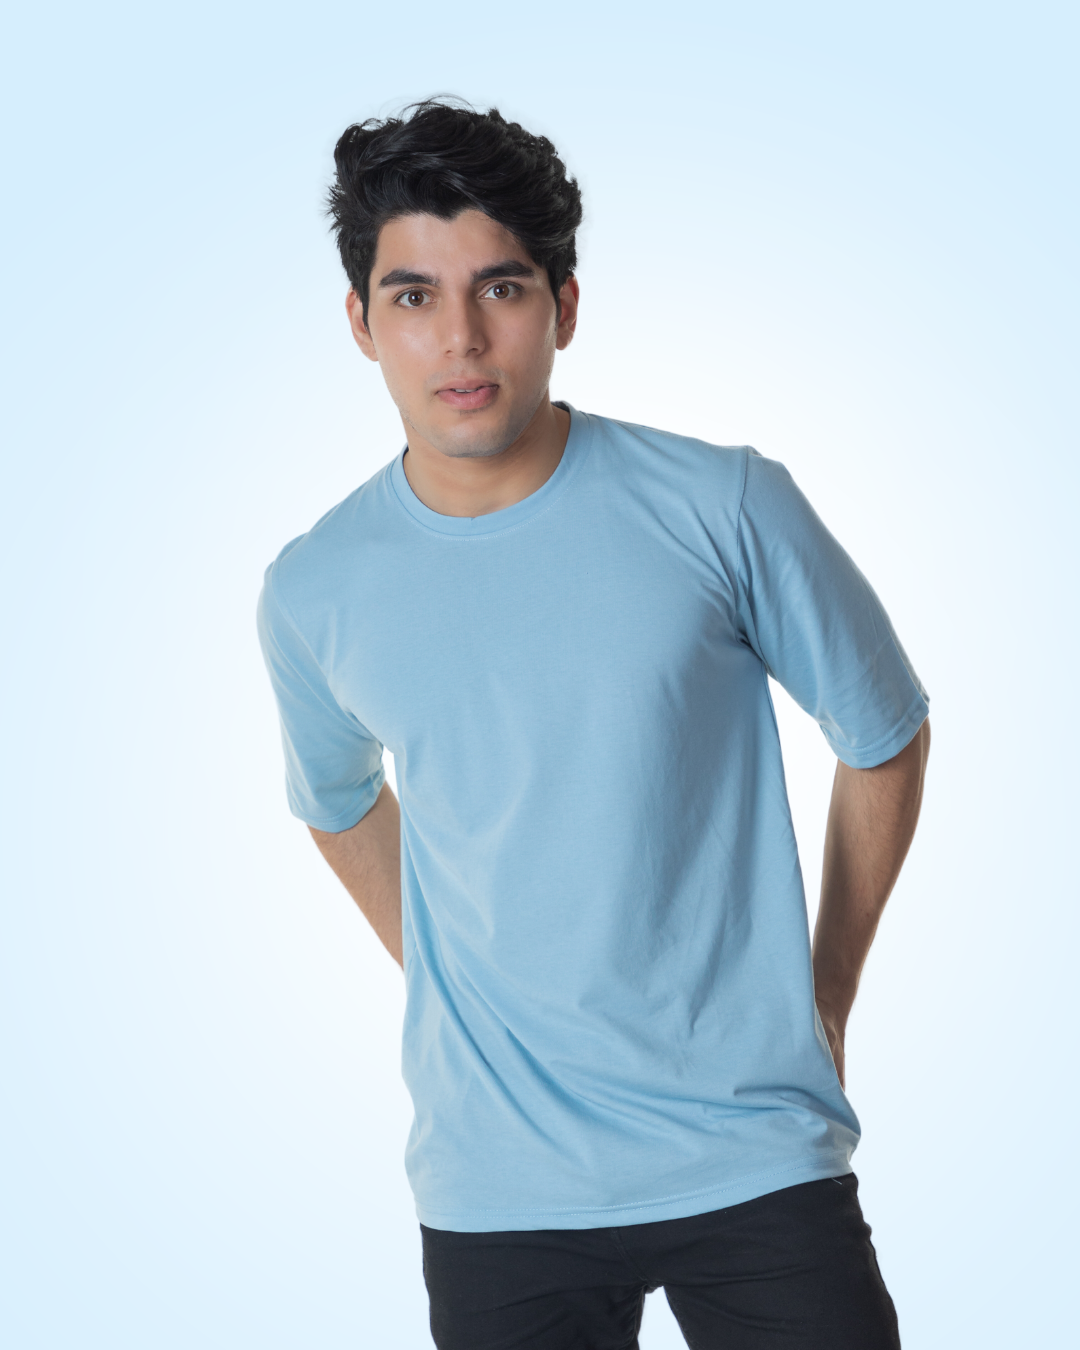 Oversized Sky Blue Solid T-shirt Crew Cut/Round Neck Elbow length Sleeves